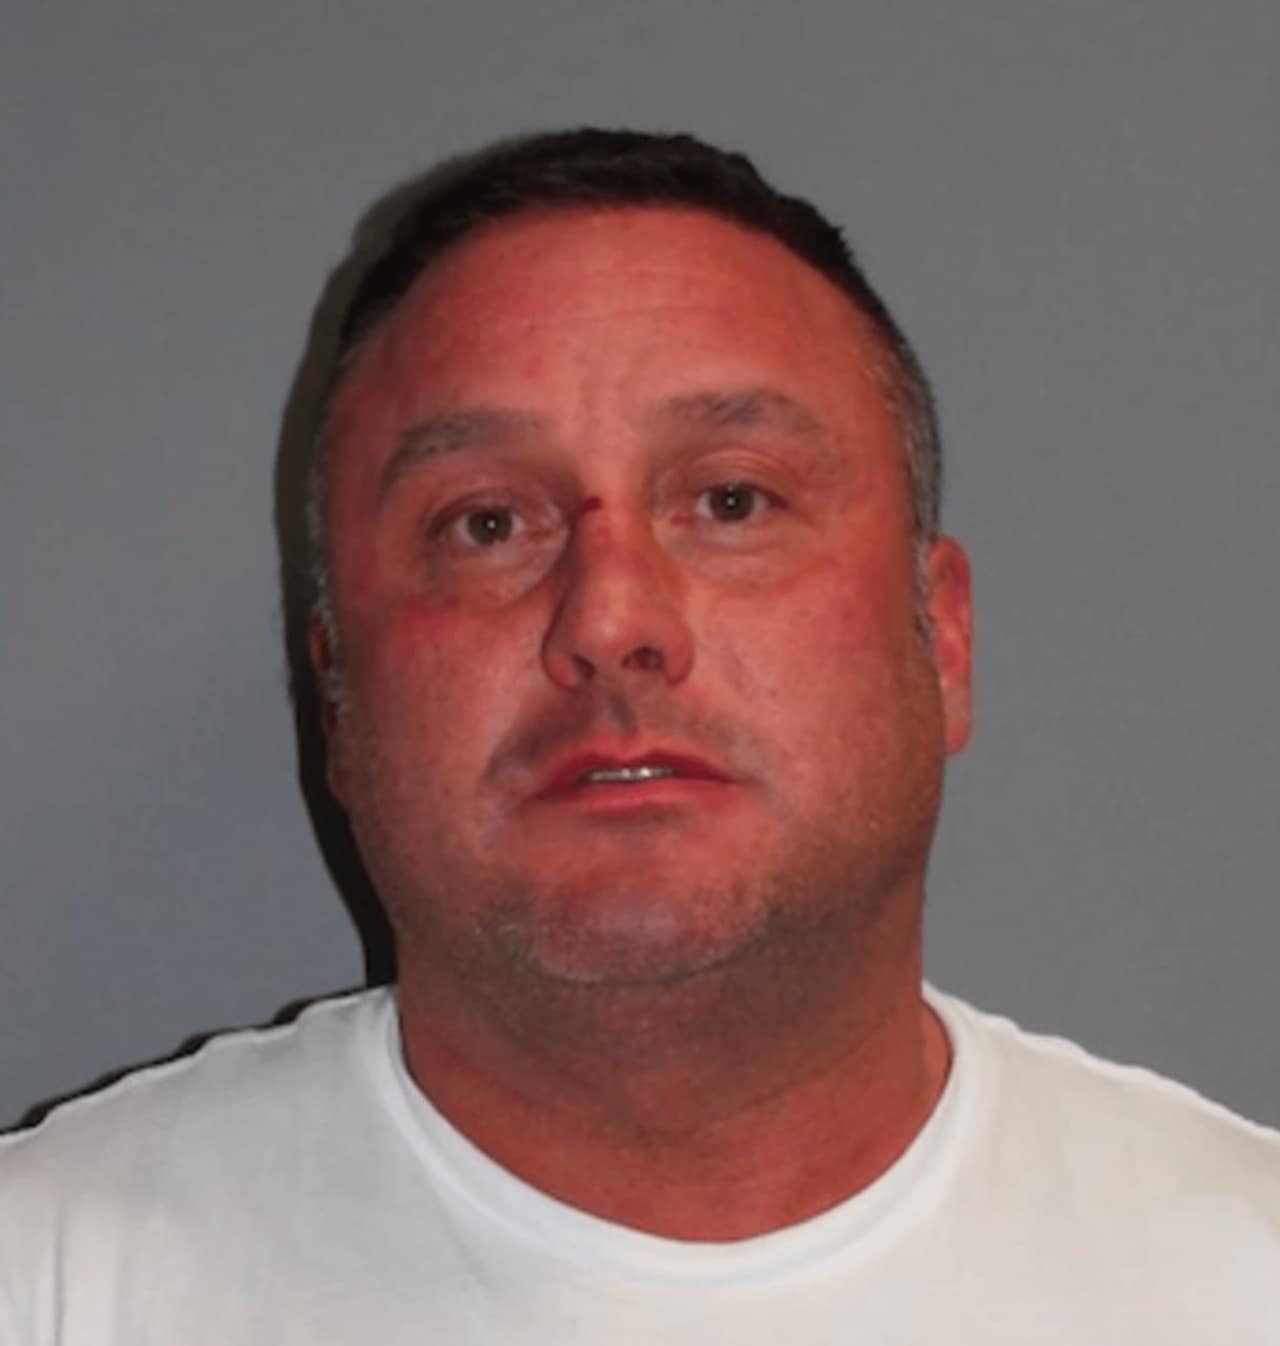 Norwalk firefighter Mark Monroe is facing drug and weapons charges after he sold cocaine to an undercover police officer including in the parking lot of his fire station, police said.